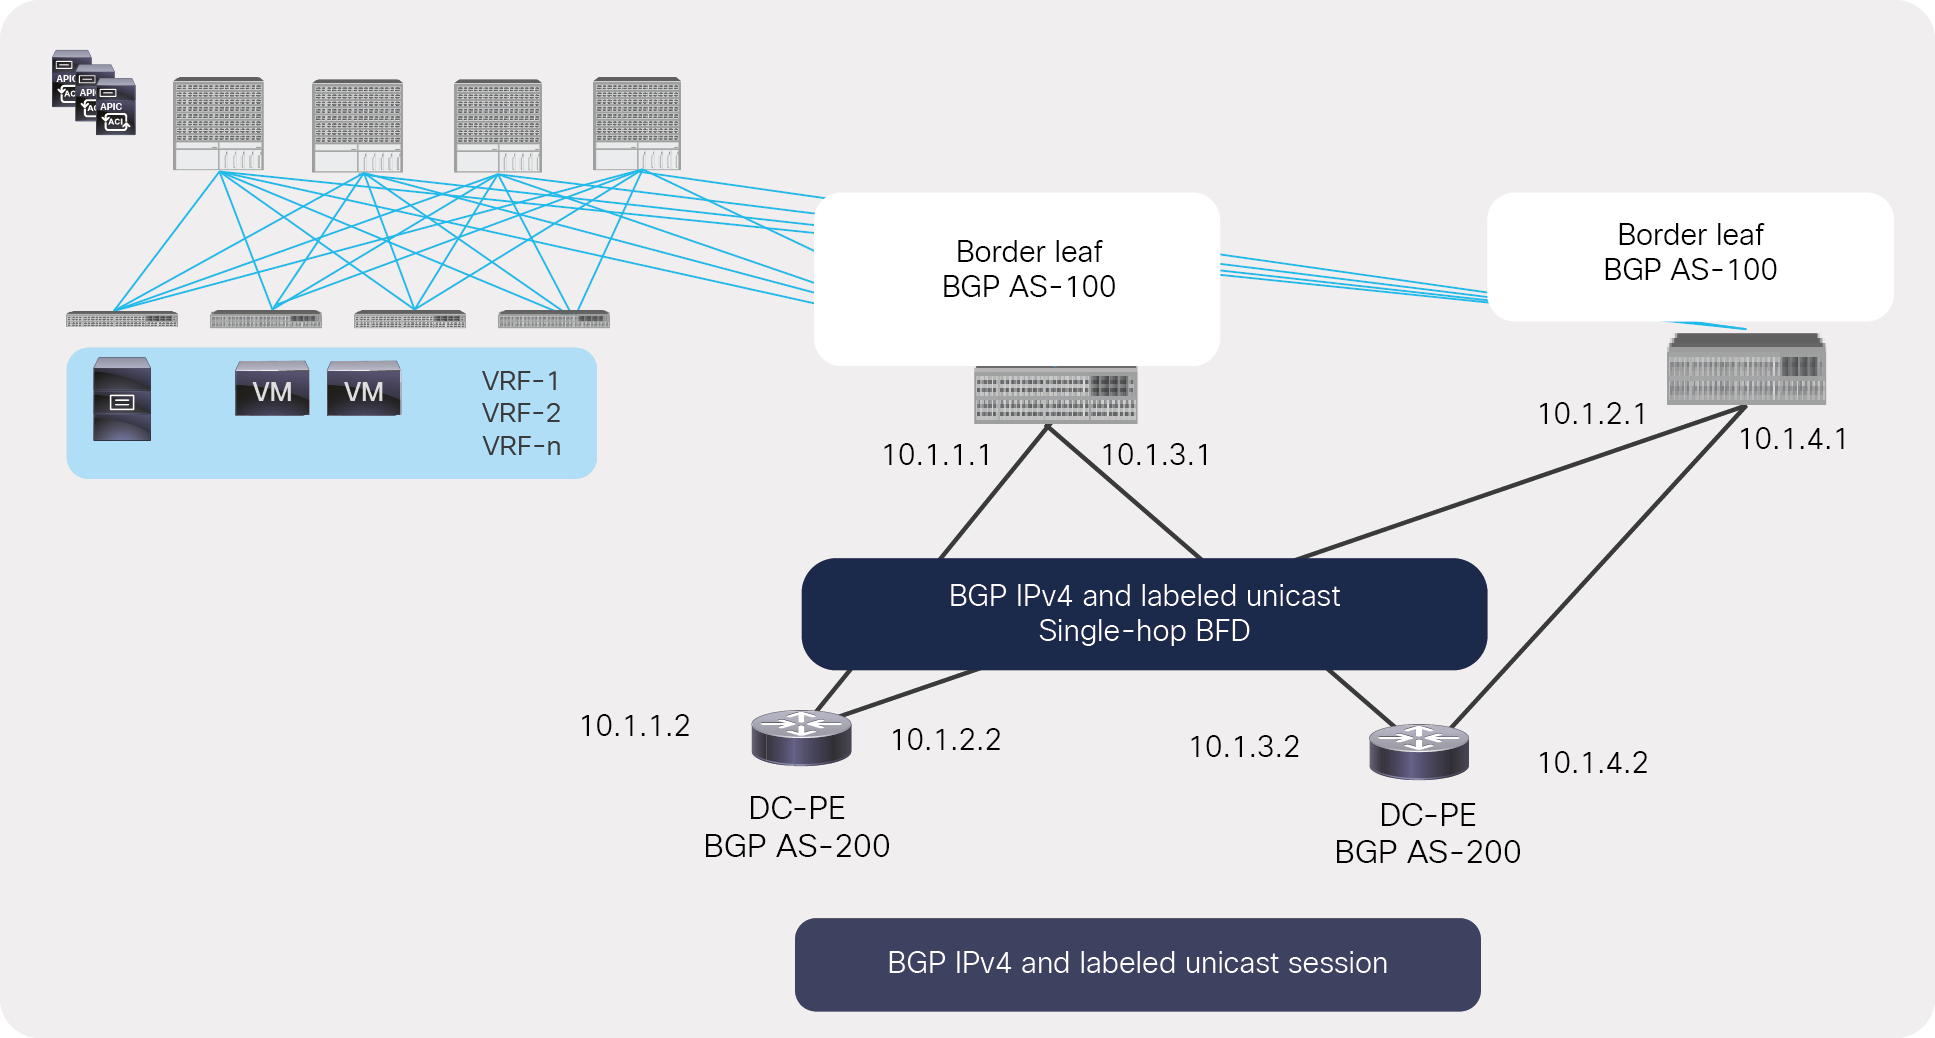 Underlay BGP LU and IPv4 sessions between an ACI border and a next-hop router with single-hop BFD